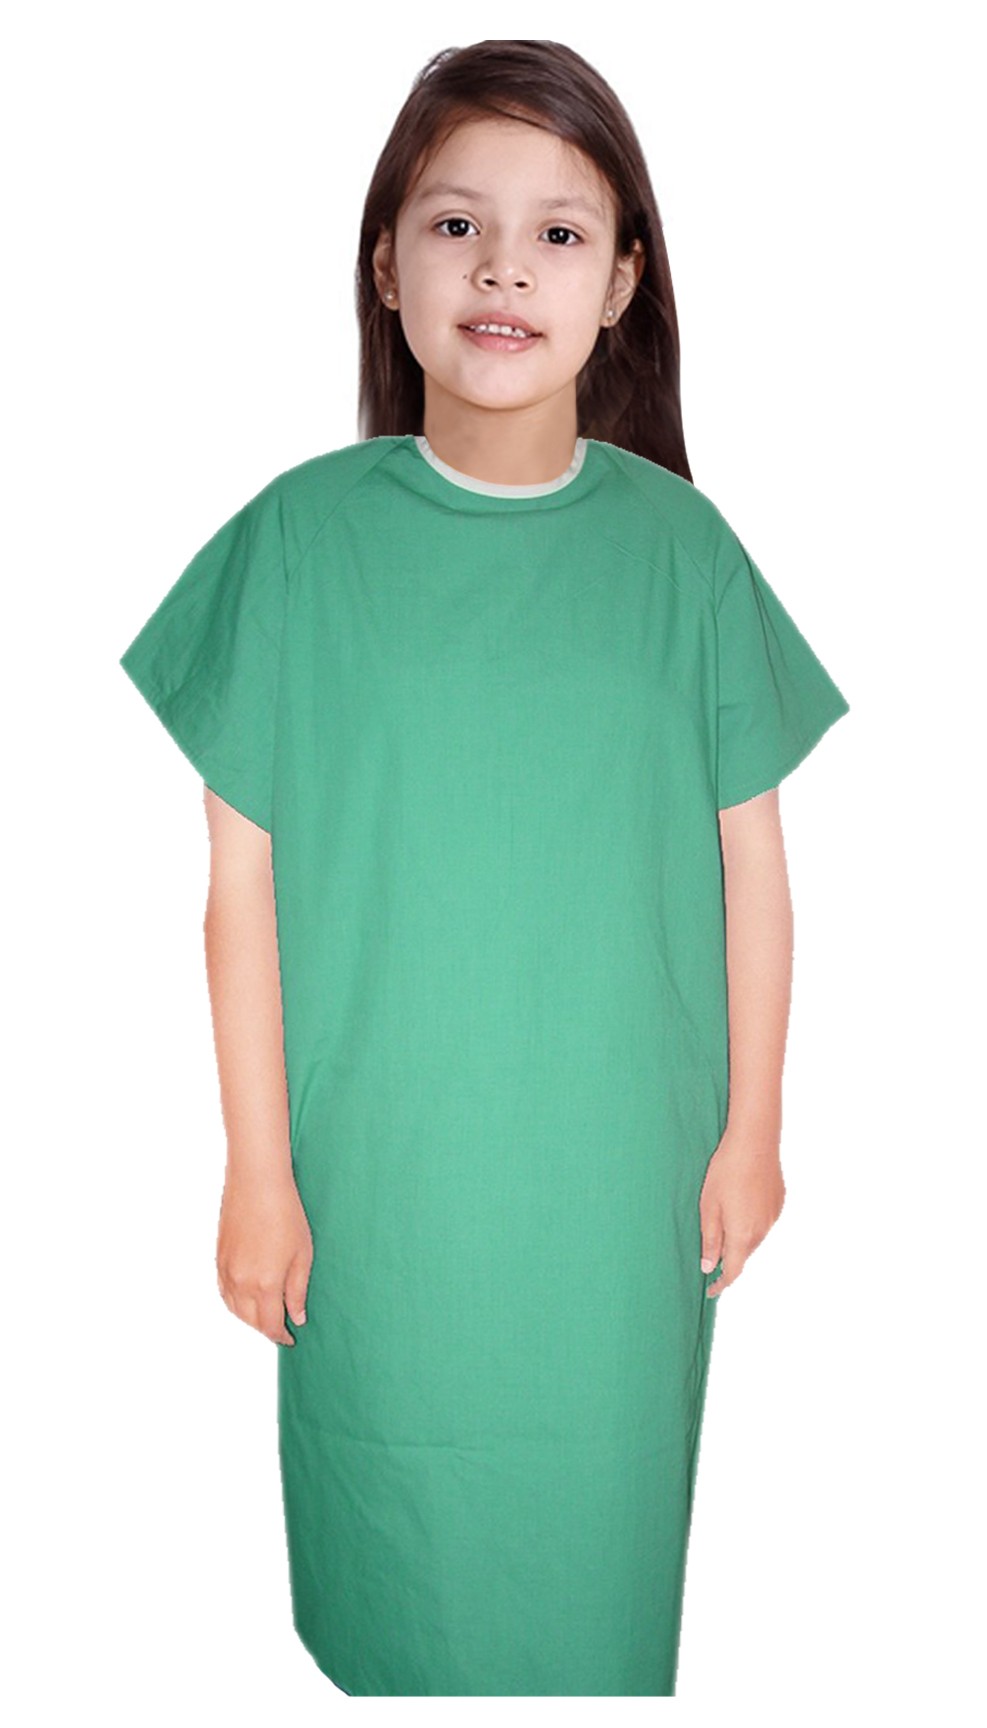 10 pieces of hospital clothing worth buying for post-surgical care -  Reviewed